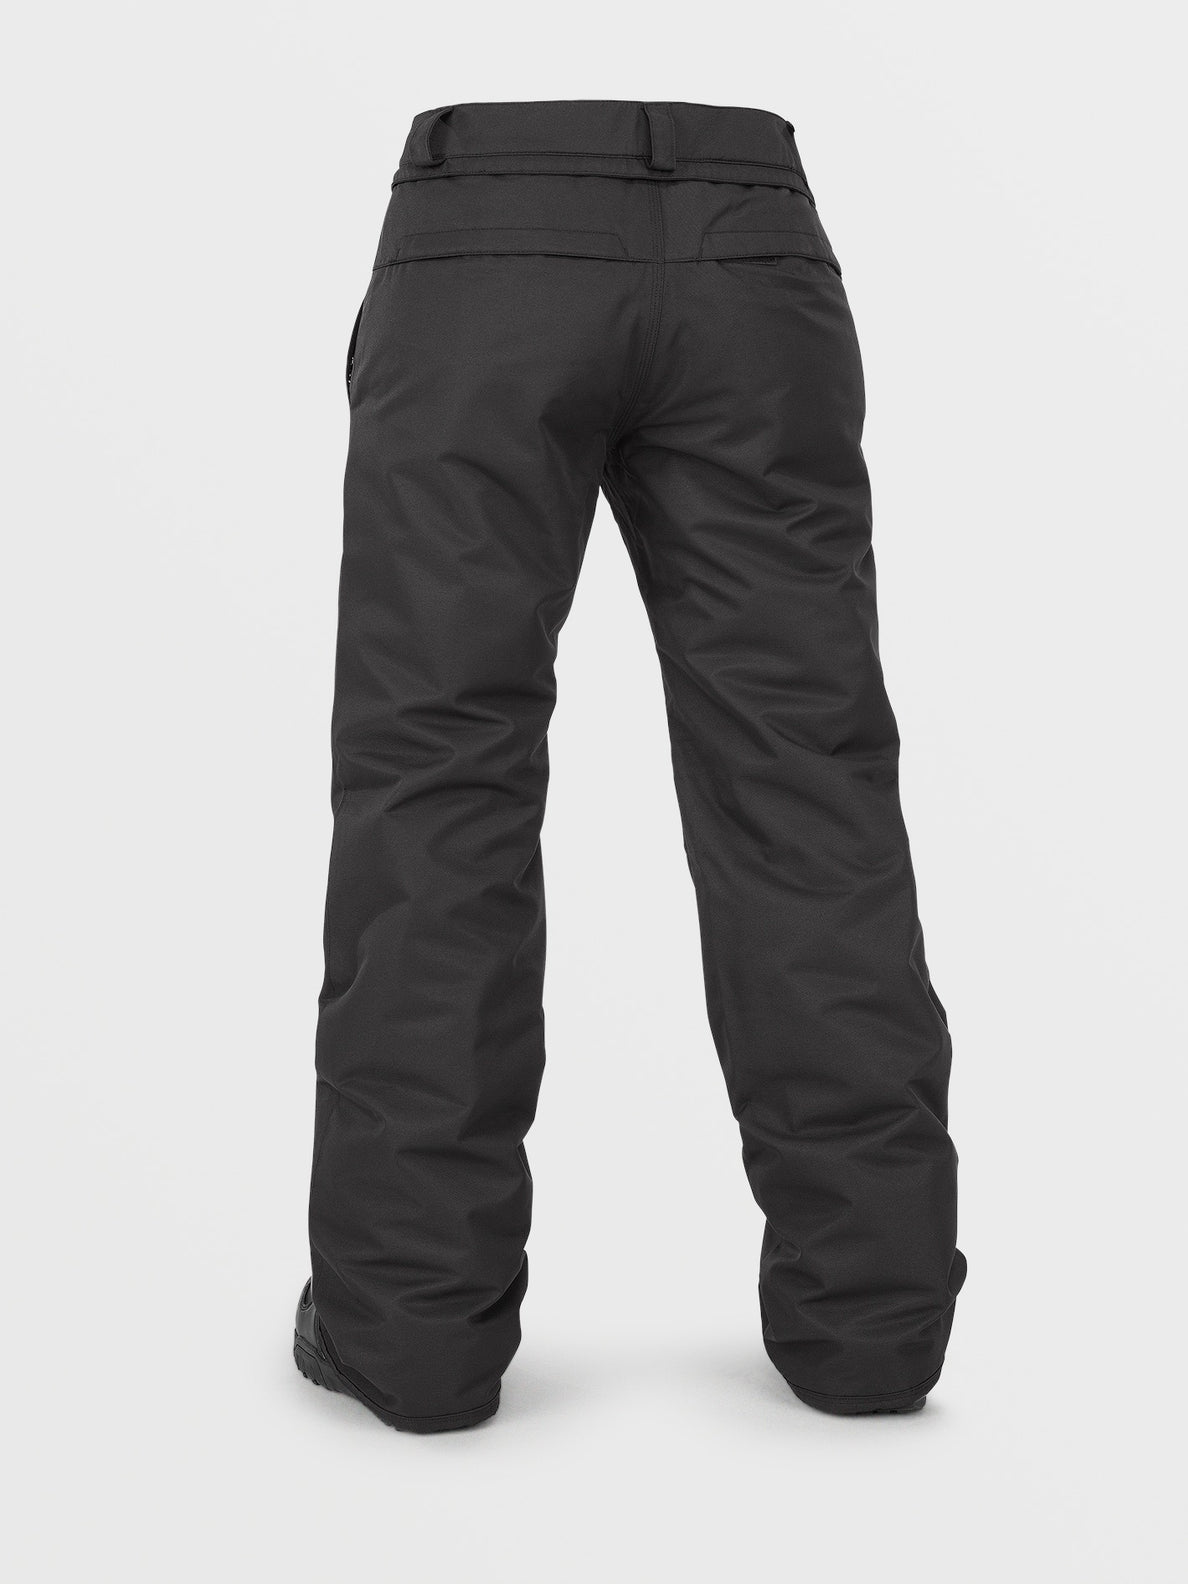 Volcom Women's Frochickie Insulated Snow Pants - Black